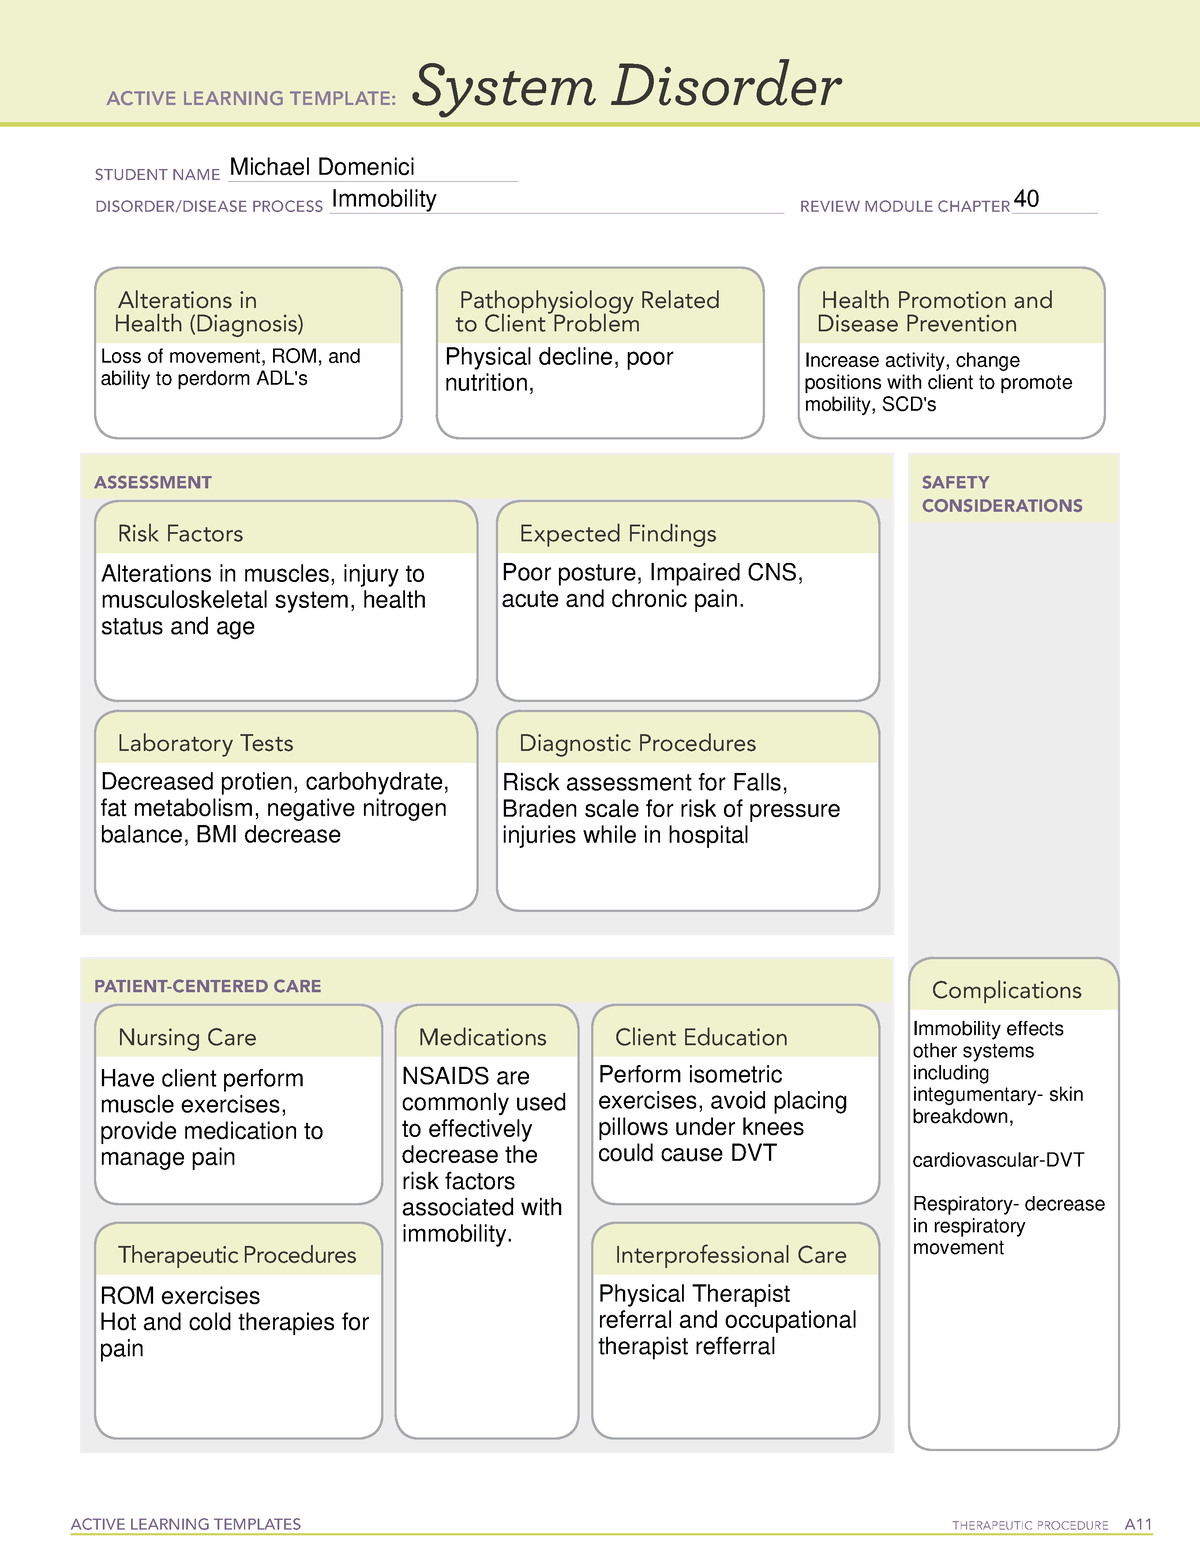 active-learning-template-system-disorder-3-active-learning-templates